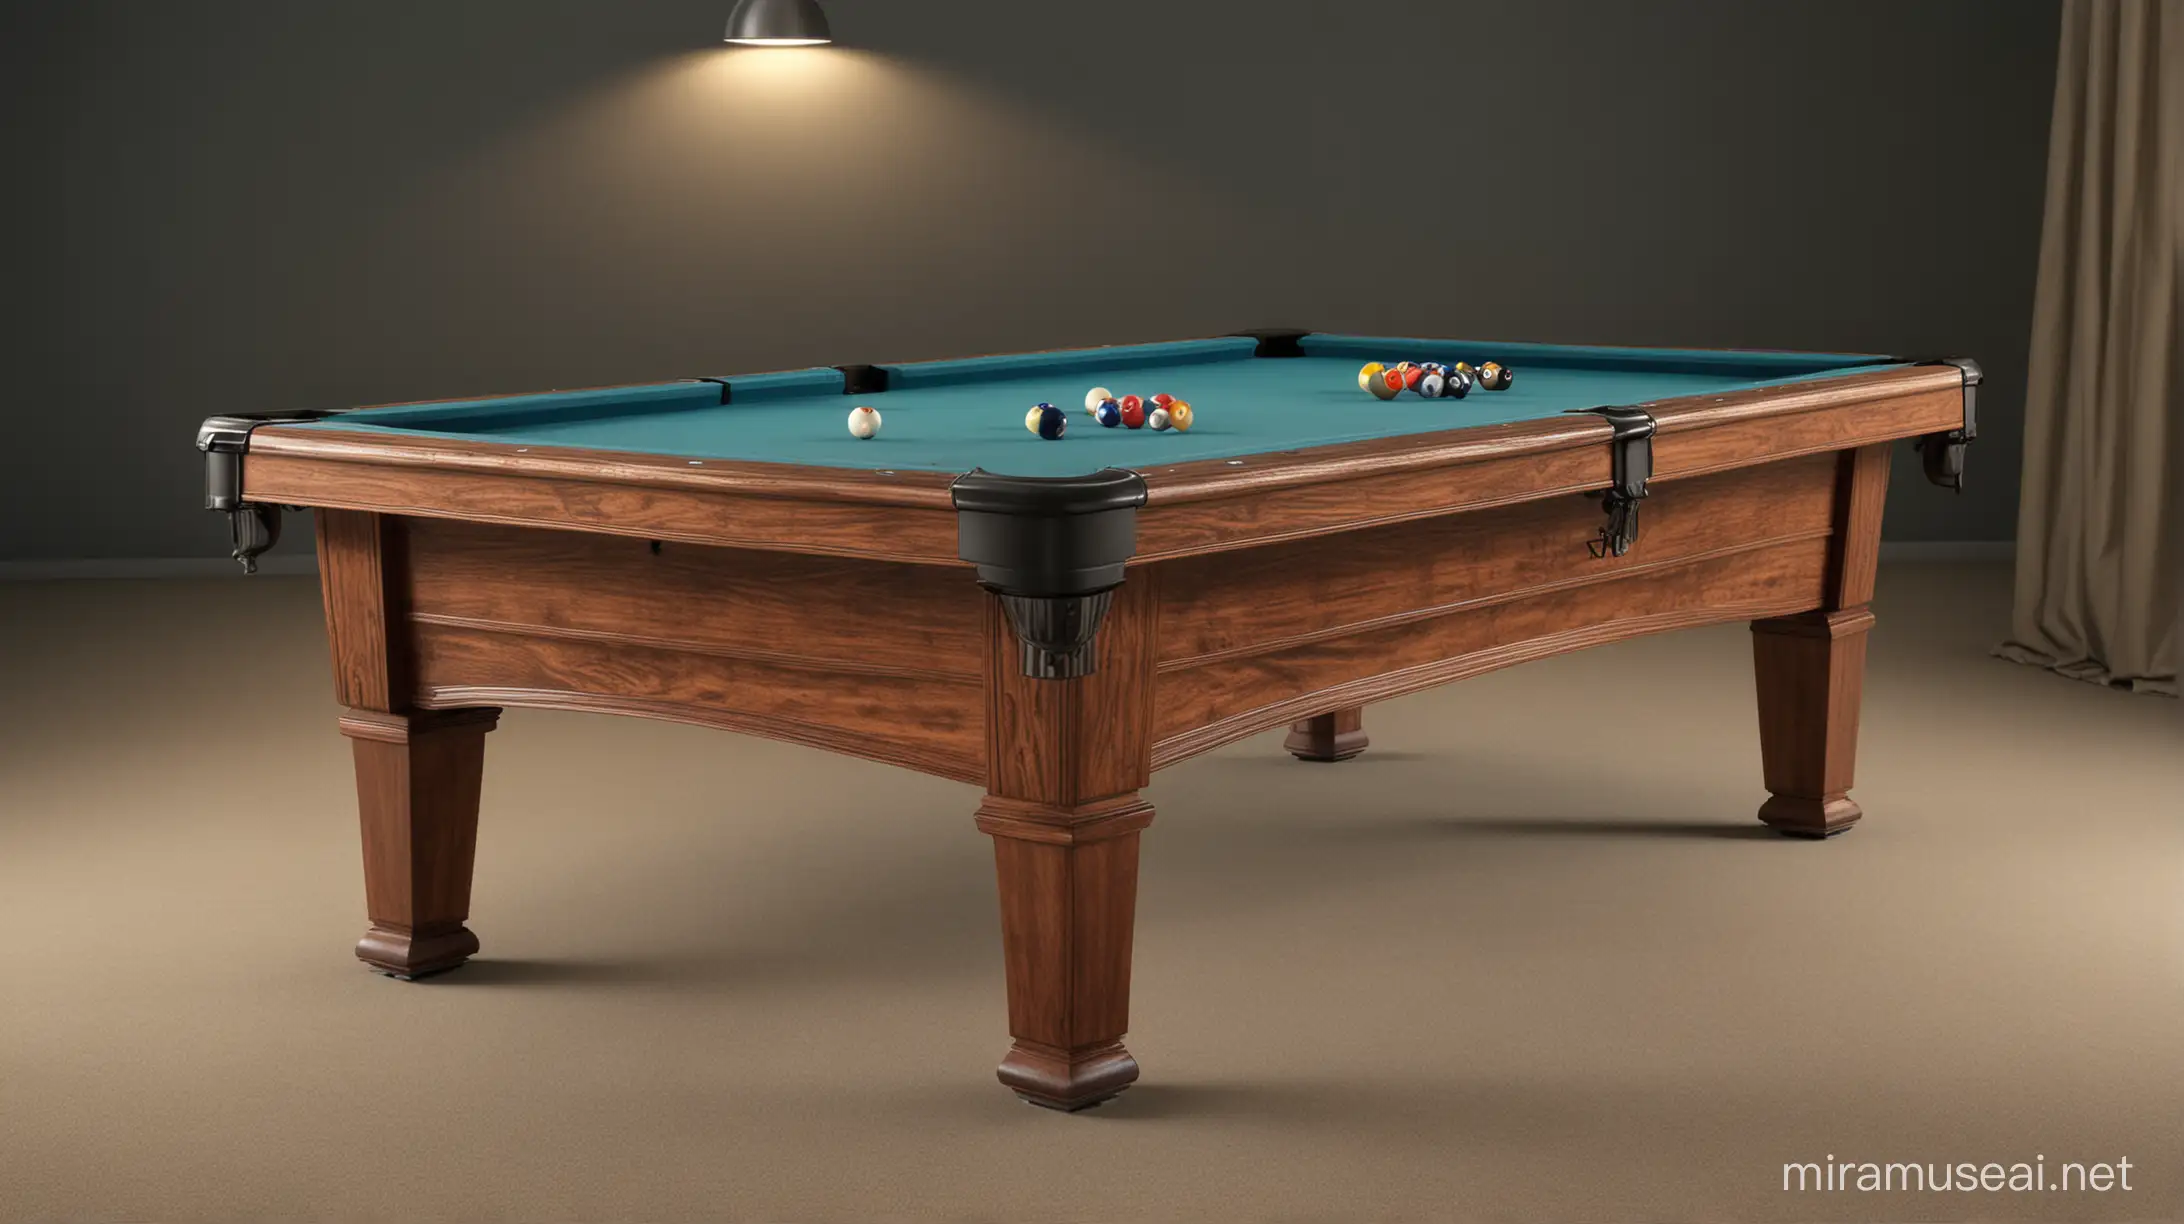 Elegant 4K View of Pool Table from Across the Room